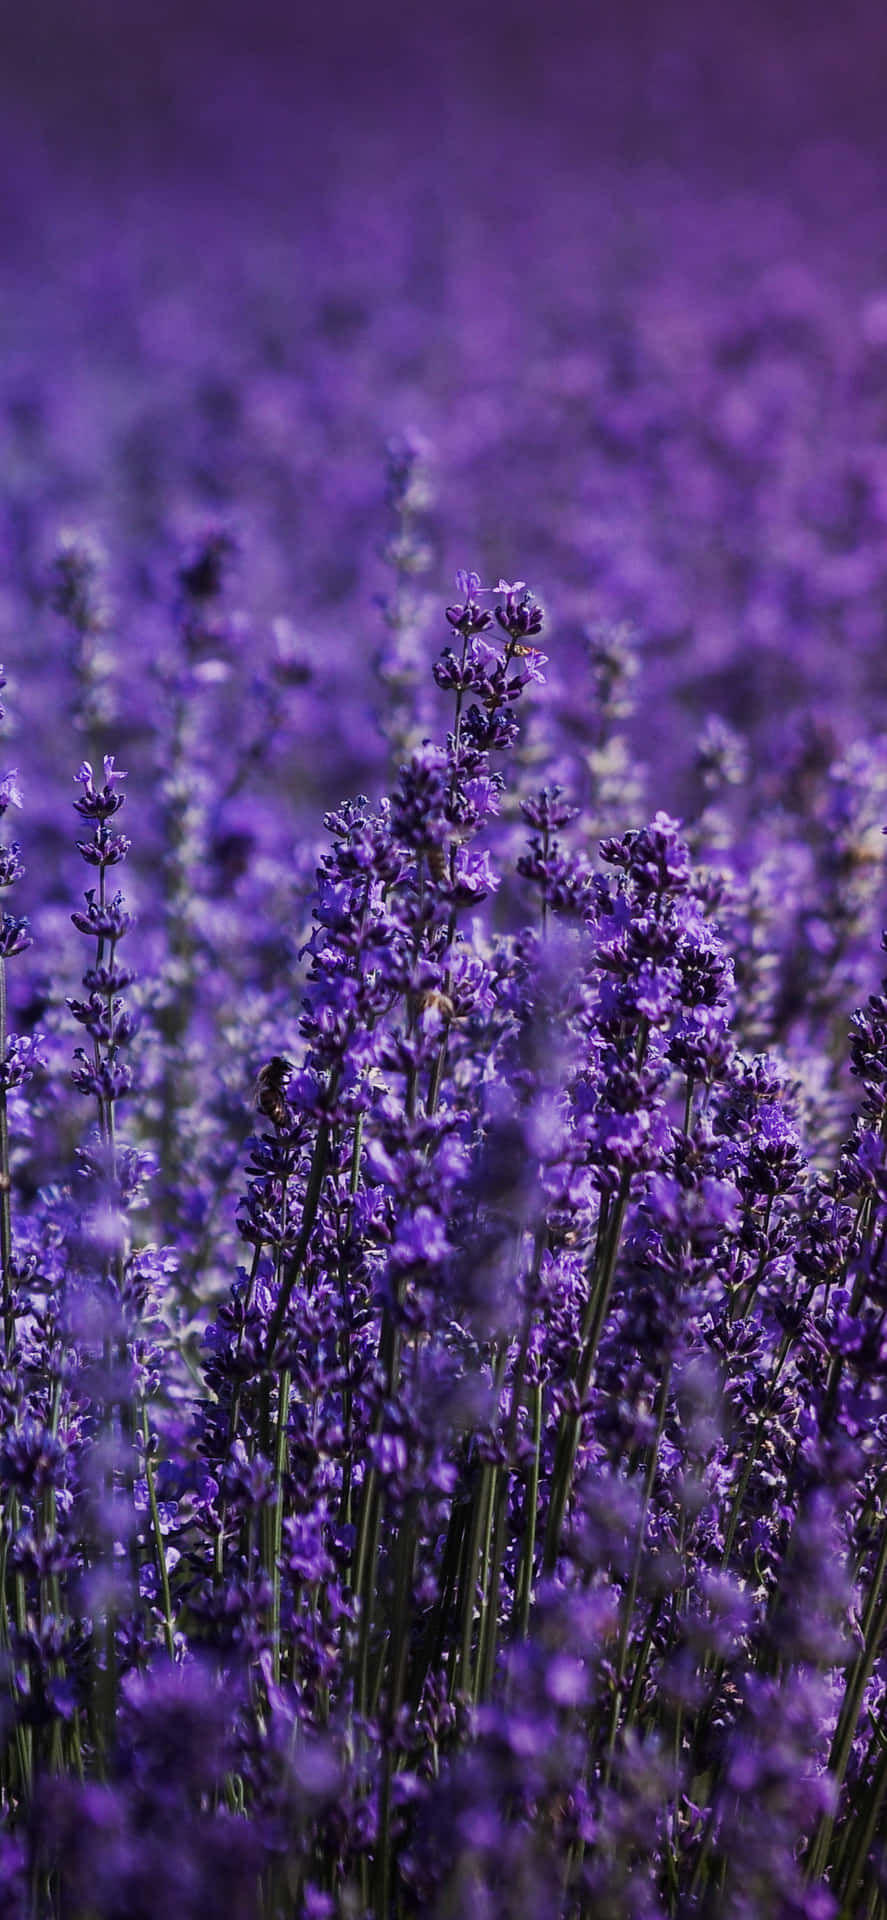 Capturing the beauty of nature in the spectacular purples of the gorgeous lavender fields Wallpaper